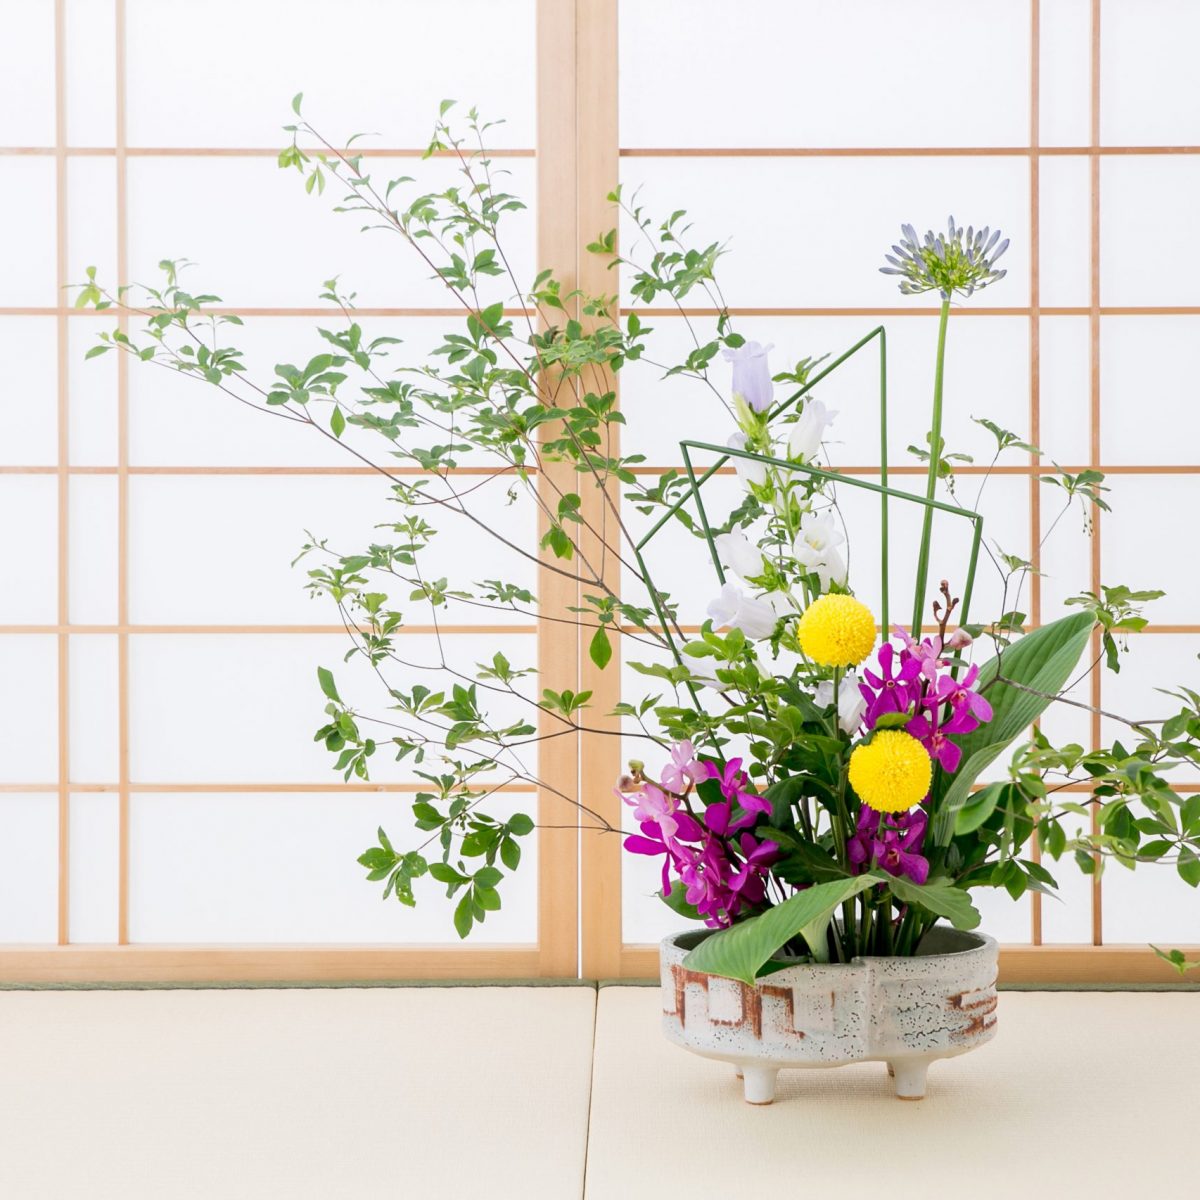 8 Exquisite Ikebana Vase Options for Your Home